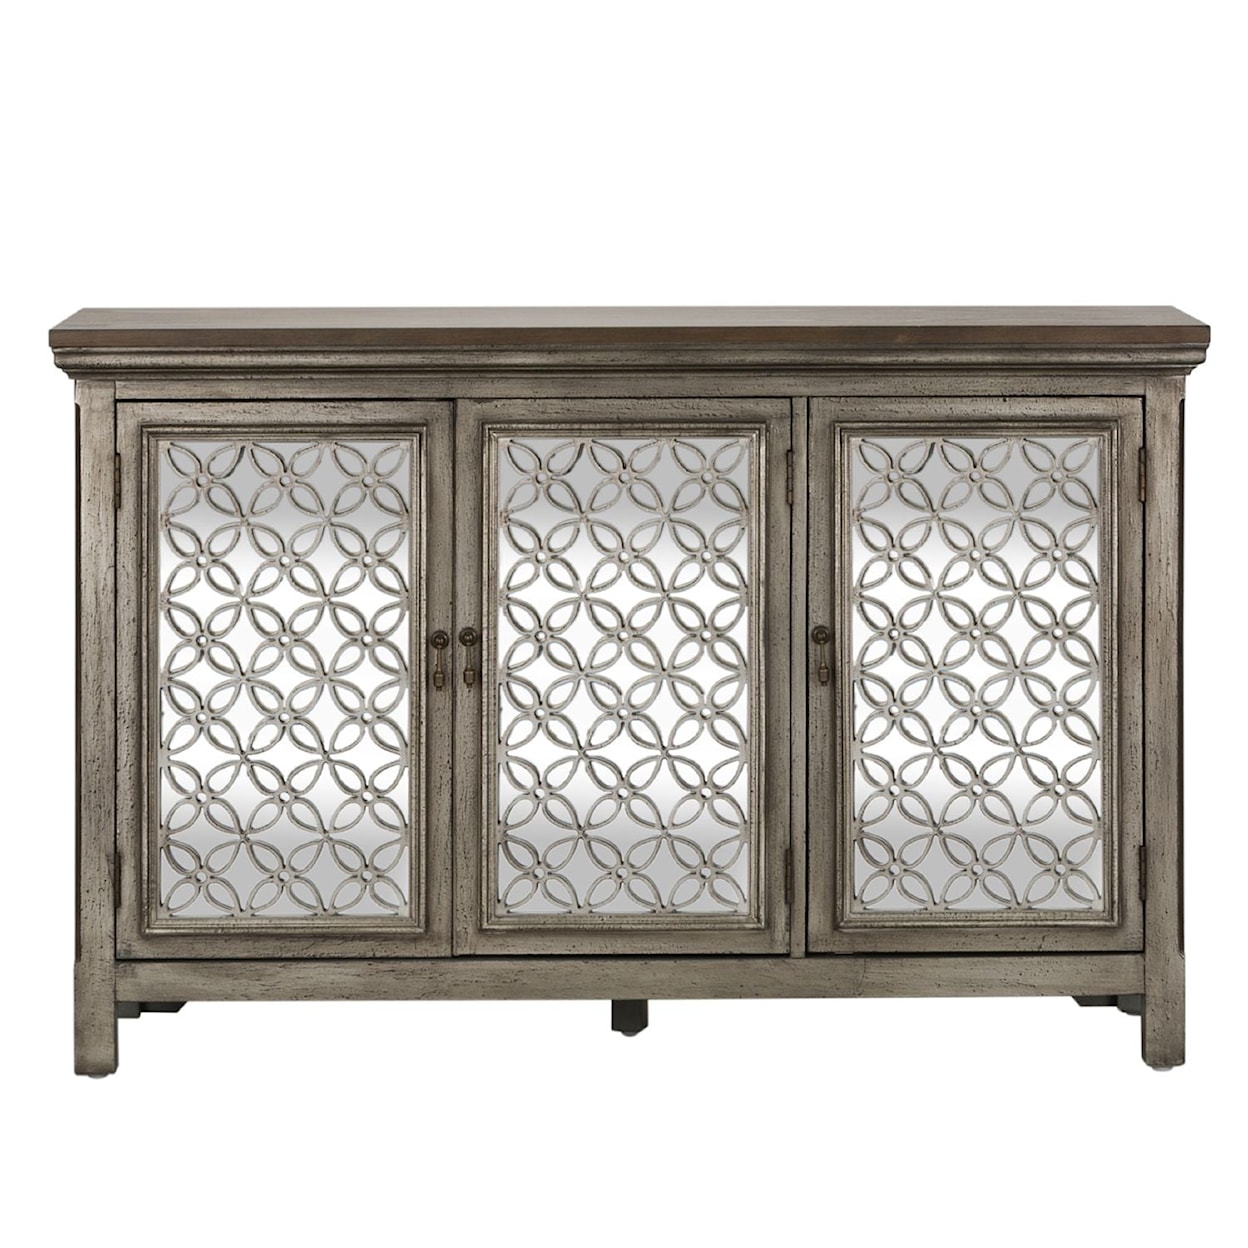 Liberty Furniture Eclectic Living Accents 3-Door Accent Chest